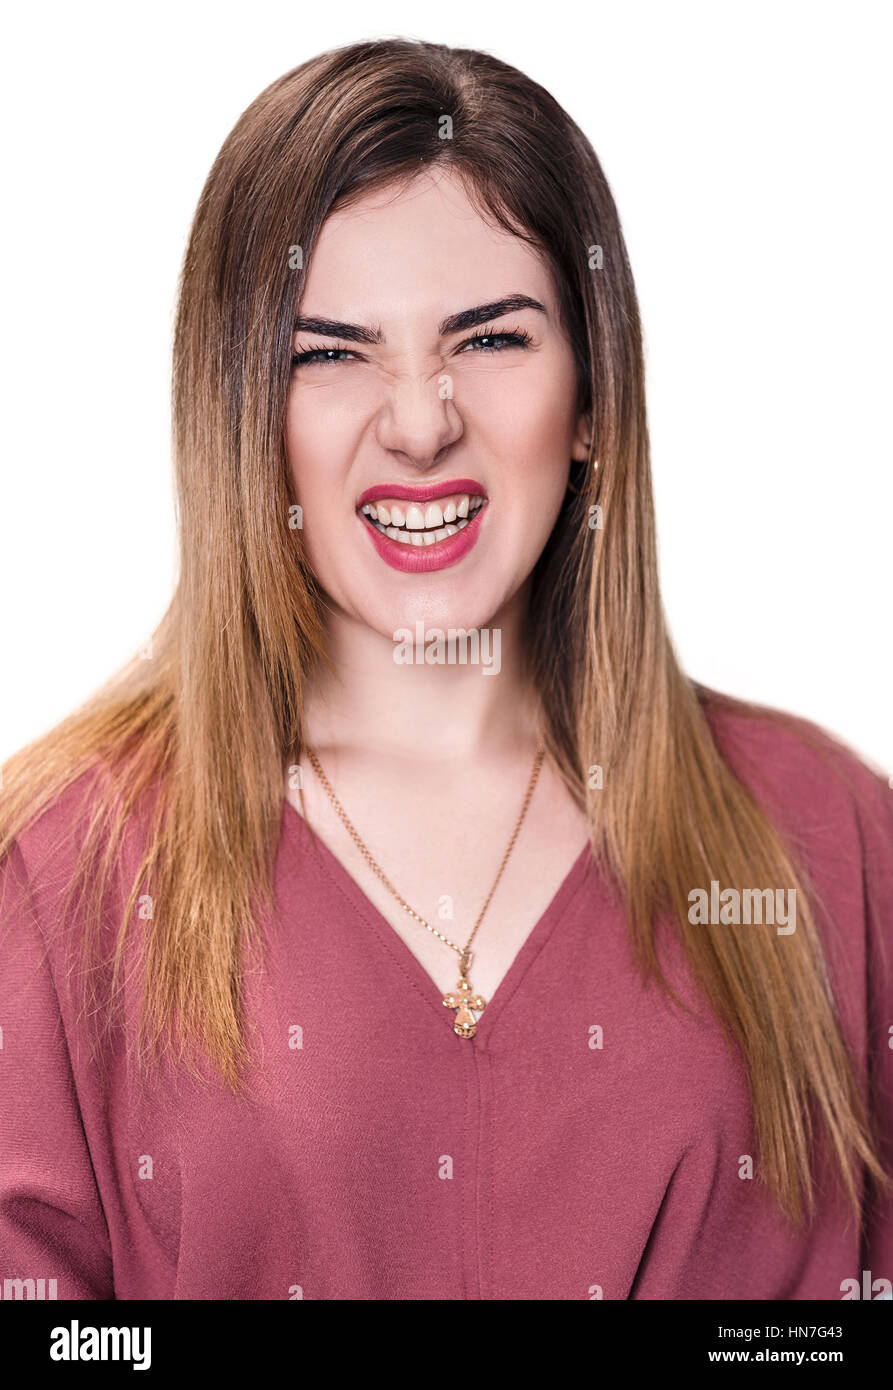 Portrait of angry young woman. Stock Photo